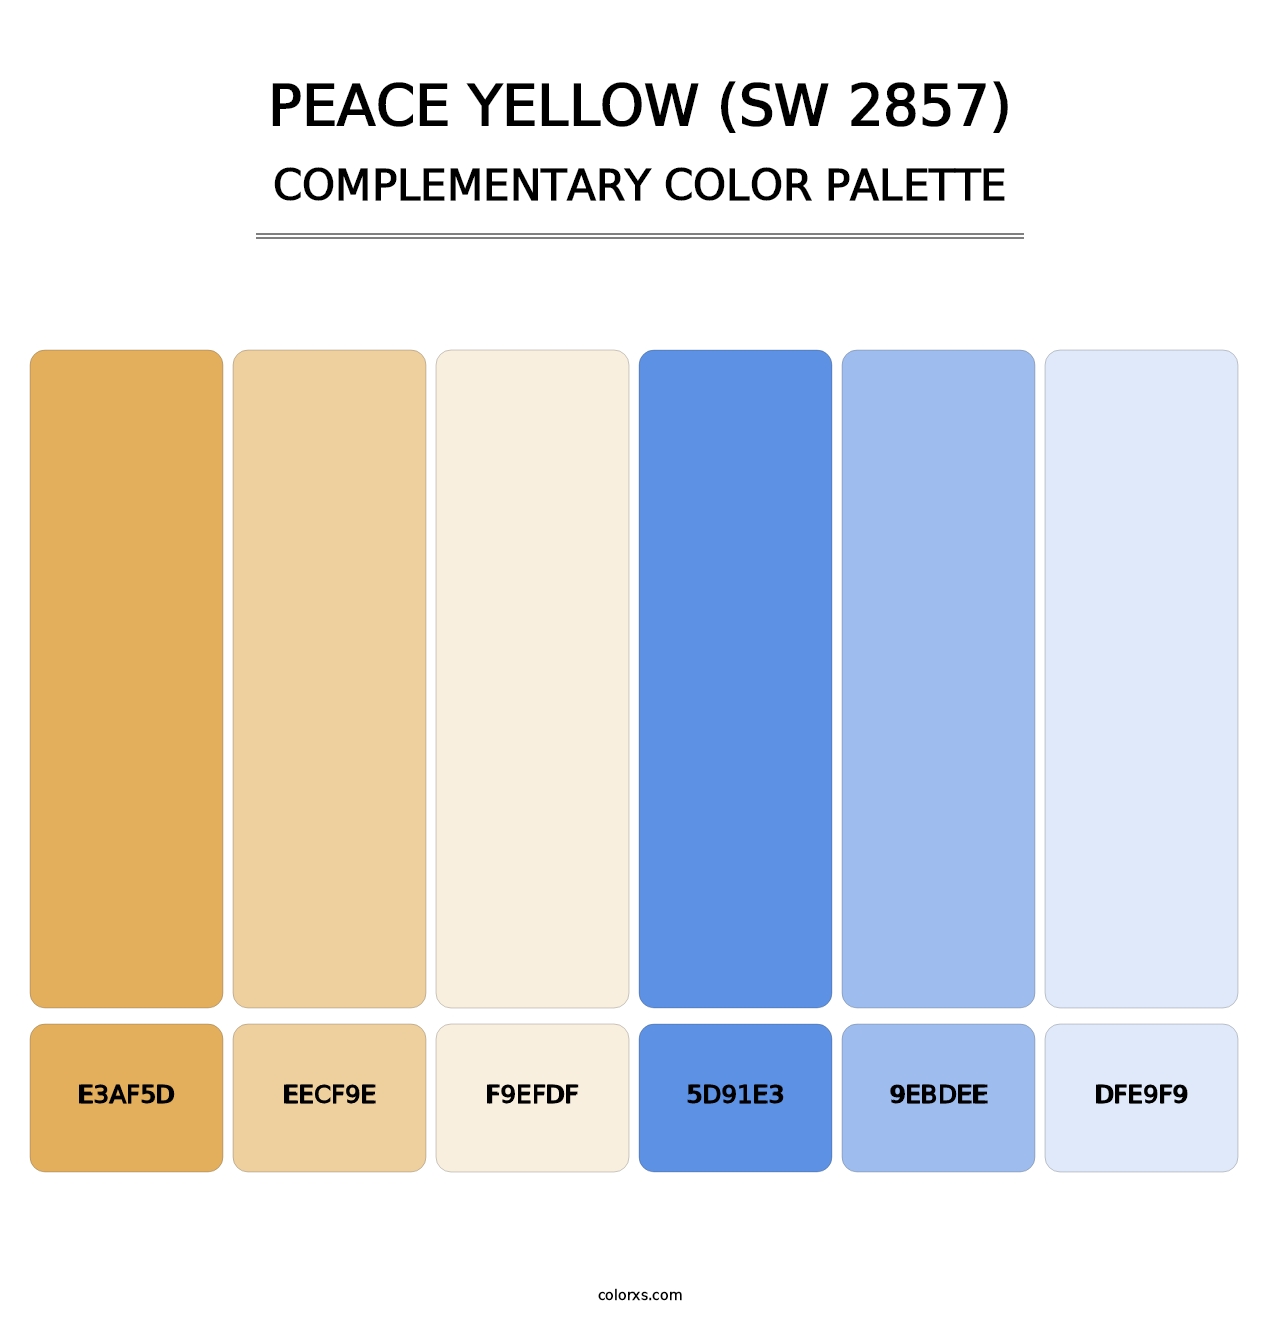 Peace Yellow (SW 2857) - Complementary Color Palette